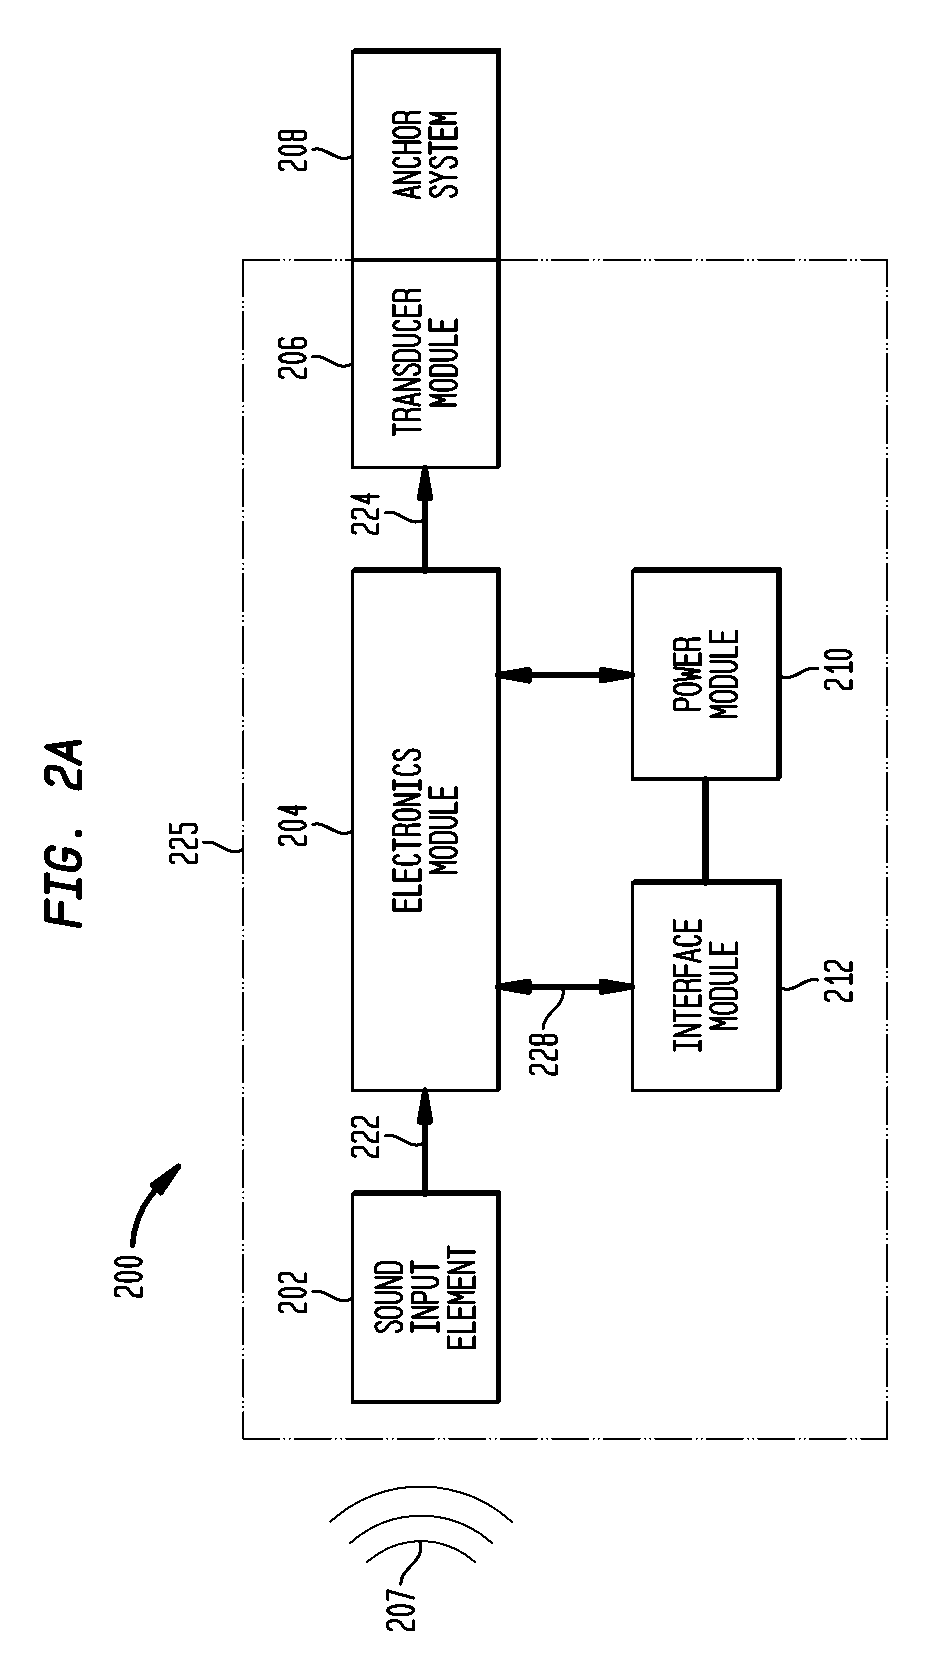 Bone conduction hearing device having acoustic feedback reduction system